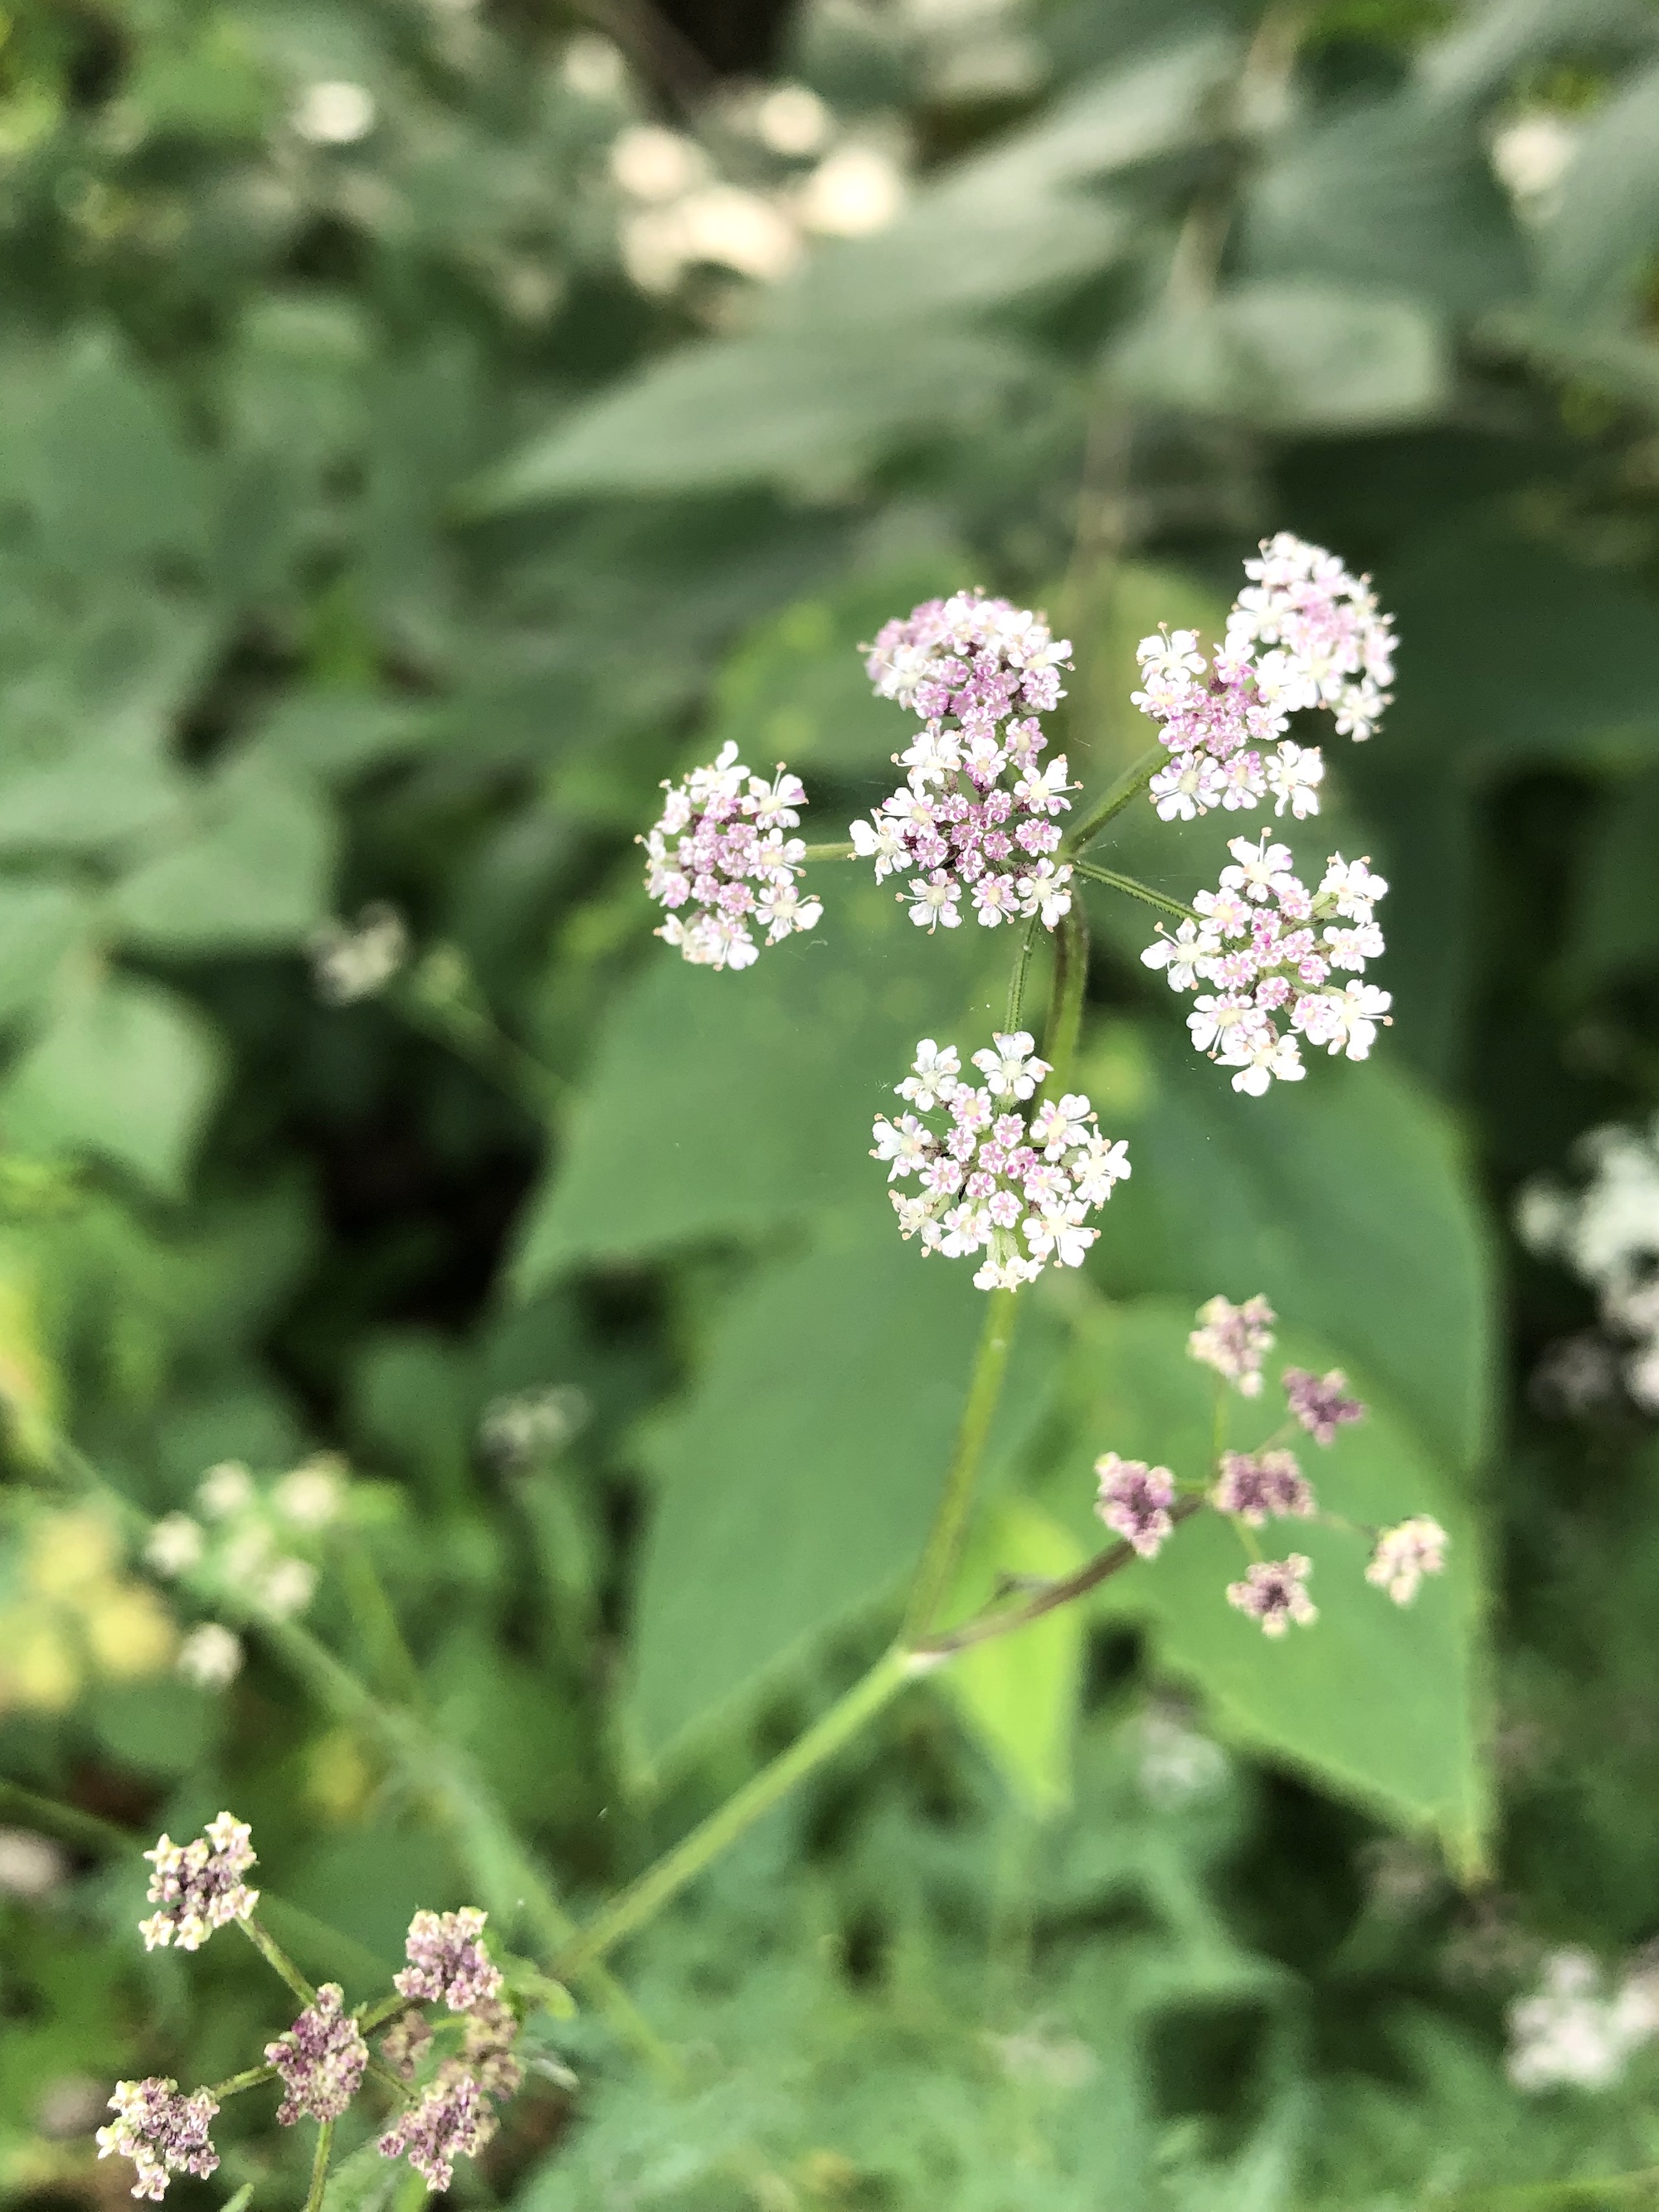 Hedge Parsley in Madison, Wisconsin on July 17, 2022.